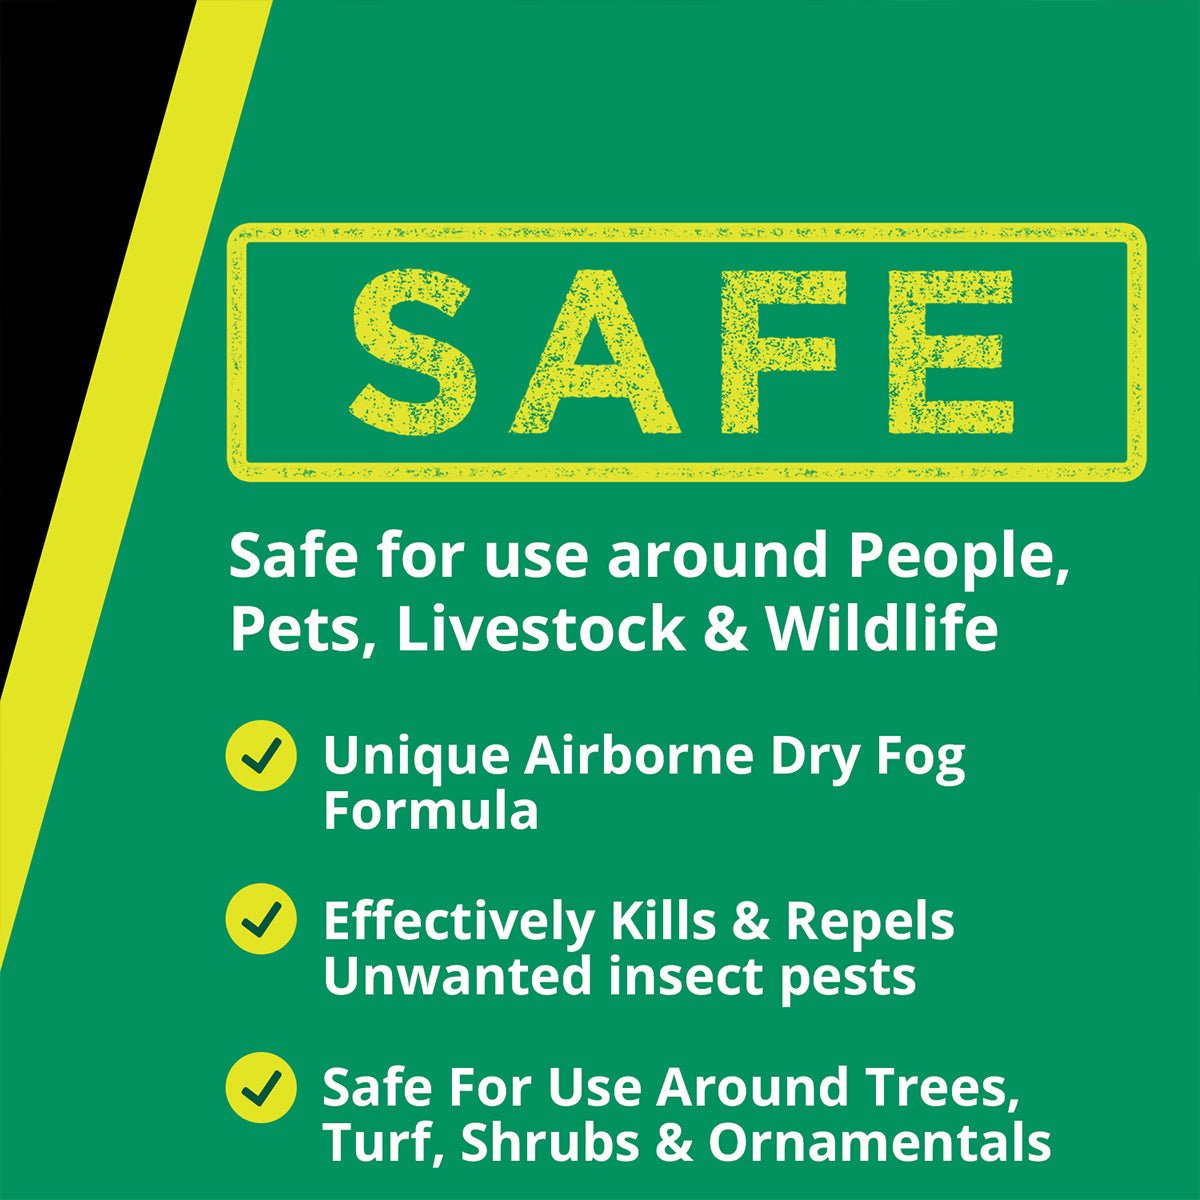 Stop Bugging Me!™ Multi-Action Fogging Solution is safe for use around people, pets, livestock & wildlife. Unique airborne dry fog formula. Effectively kills & repels unwanted insect pests. Safe for use around trees, turf, shrubs & ornamentals.